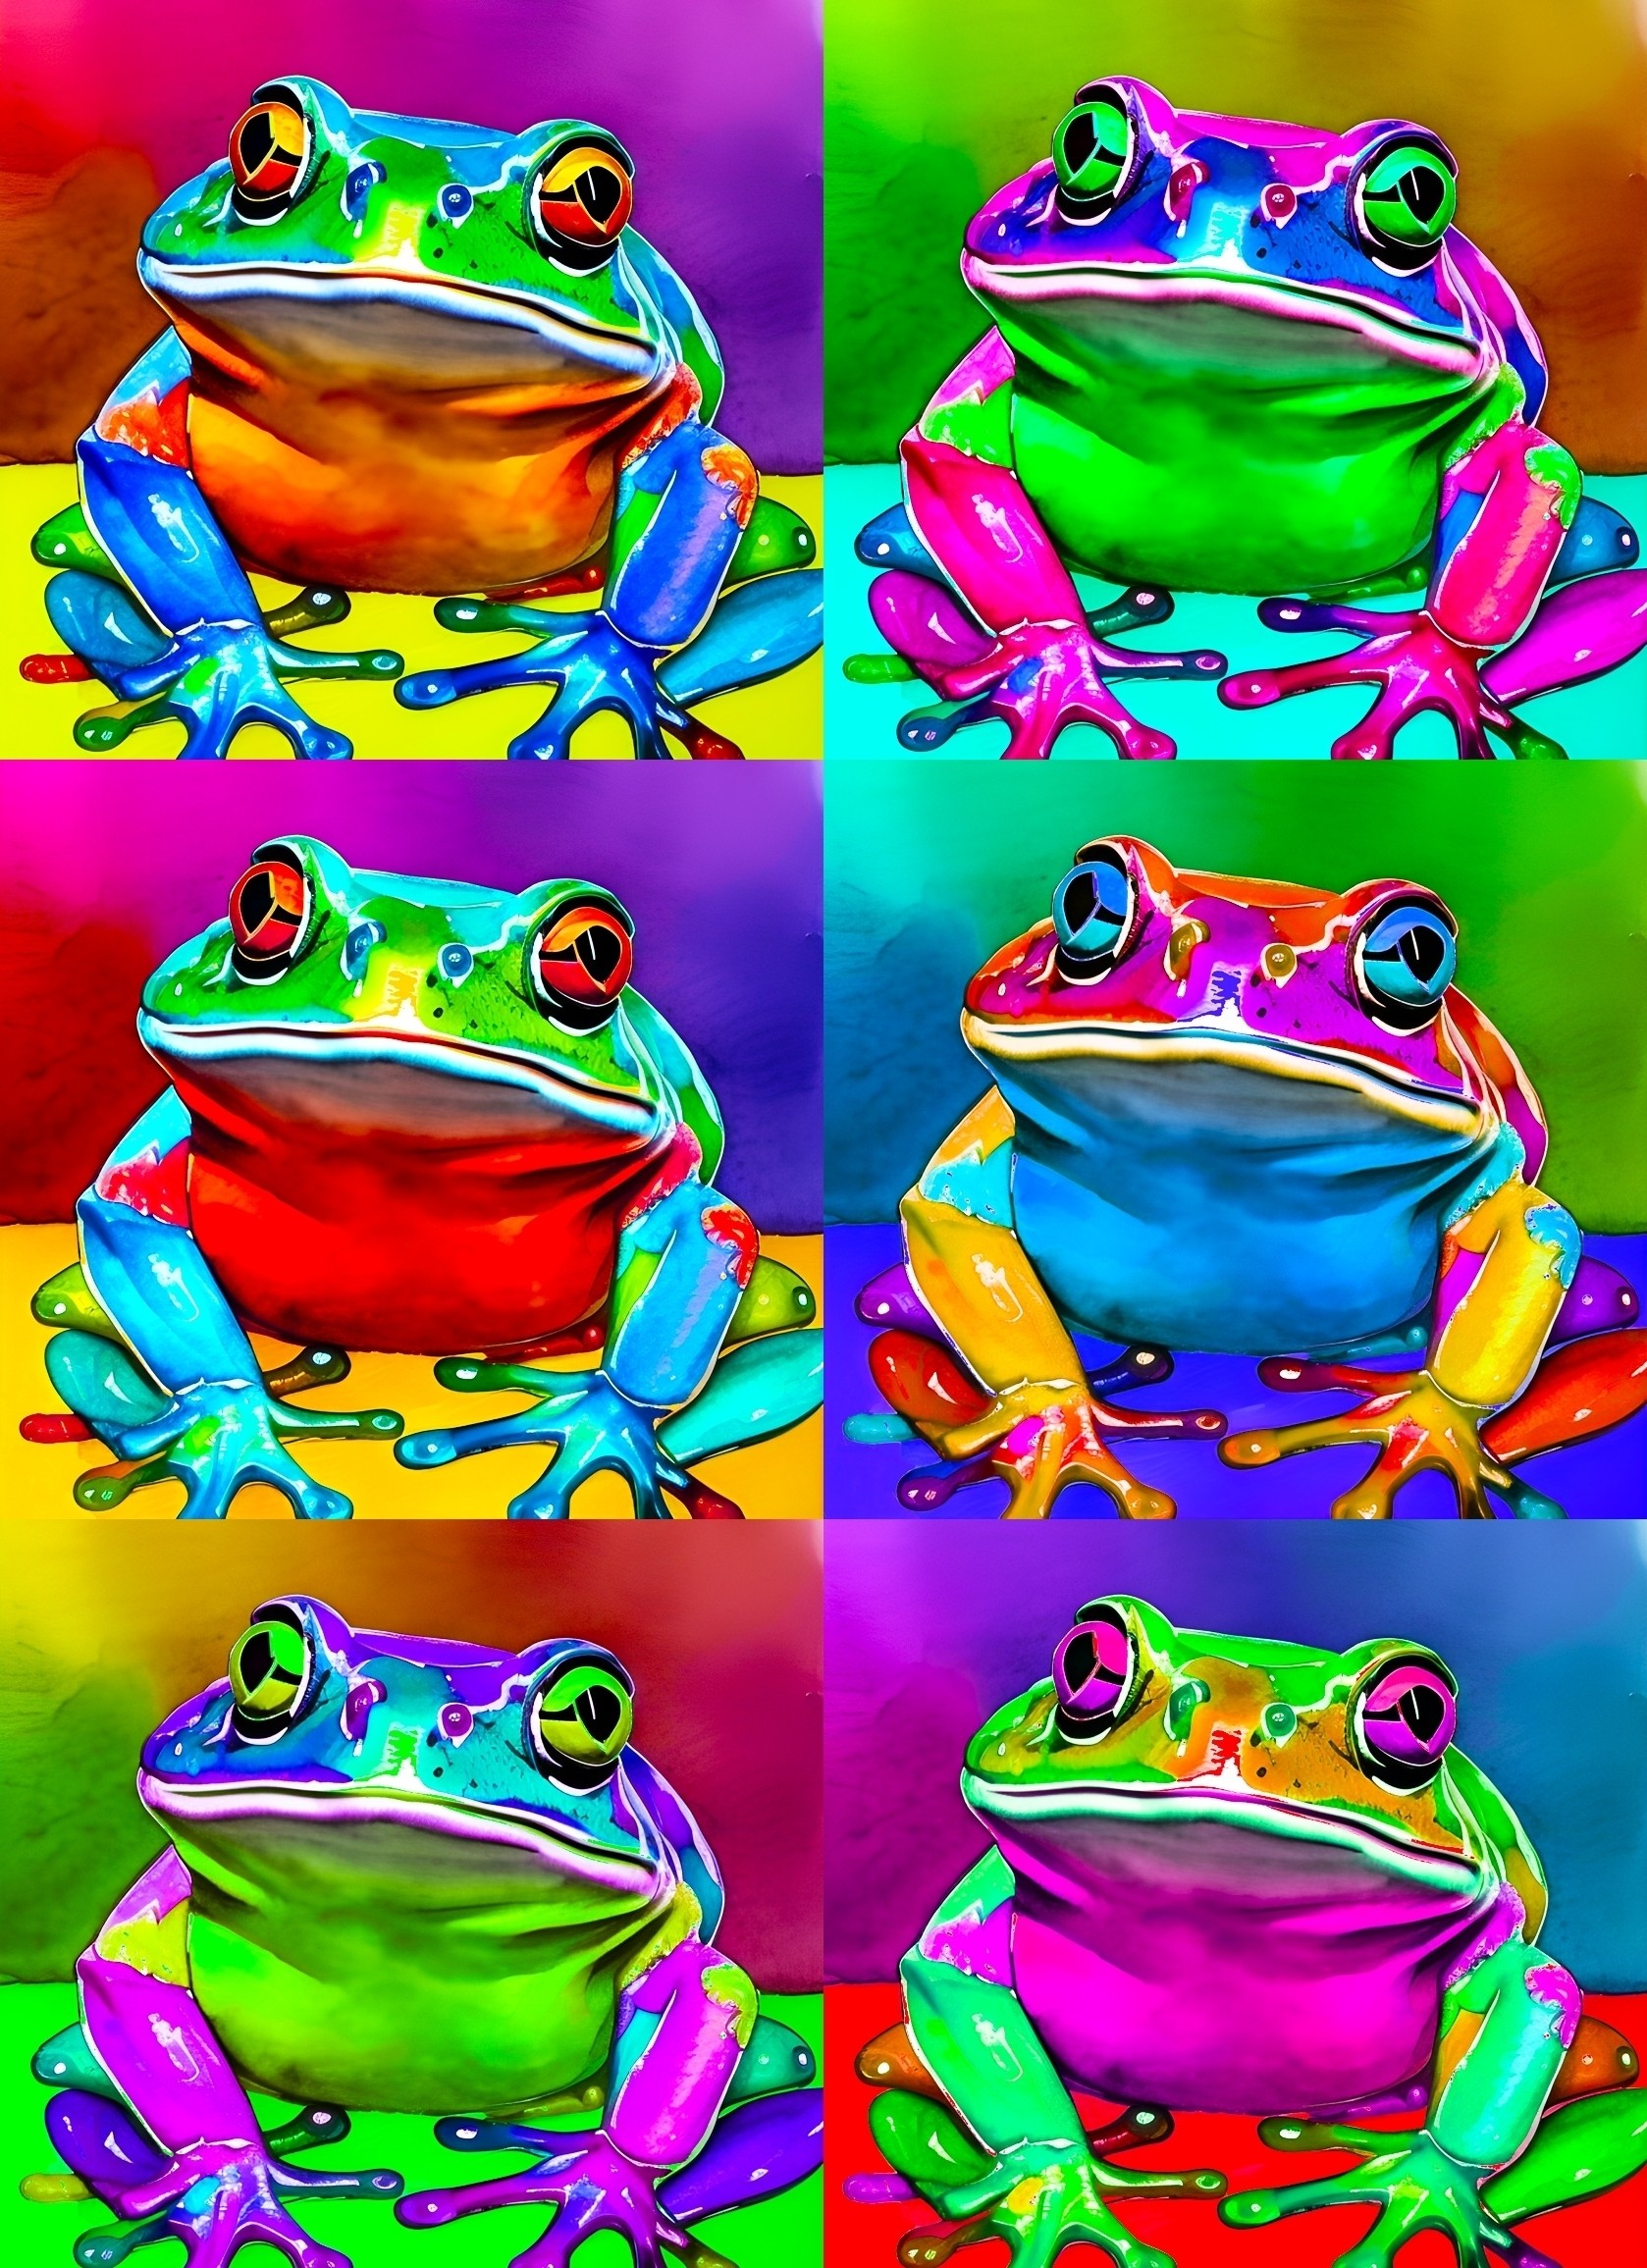 Frog Colourful Pop Art Blank Greeting Card